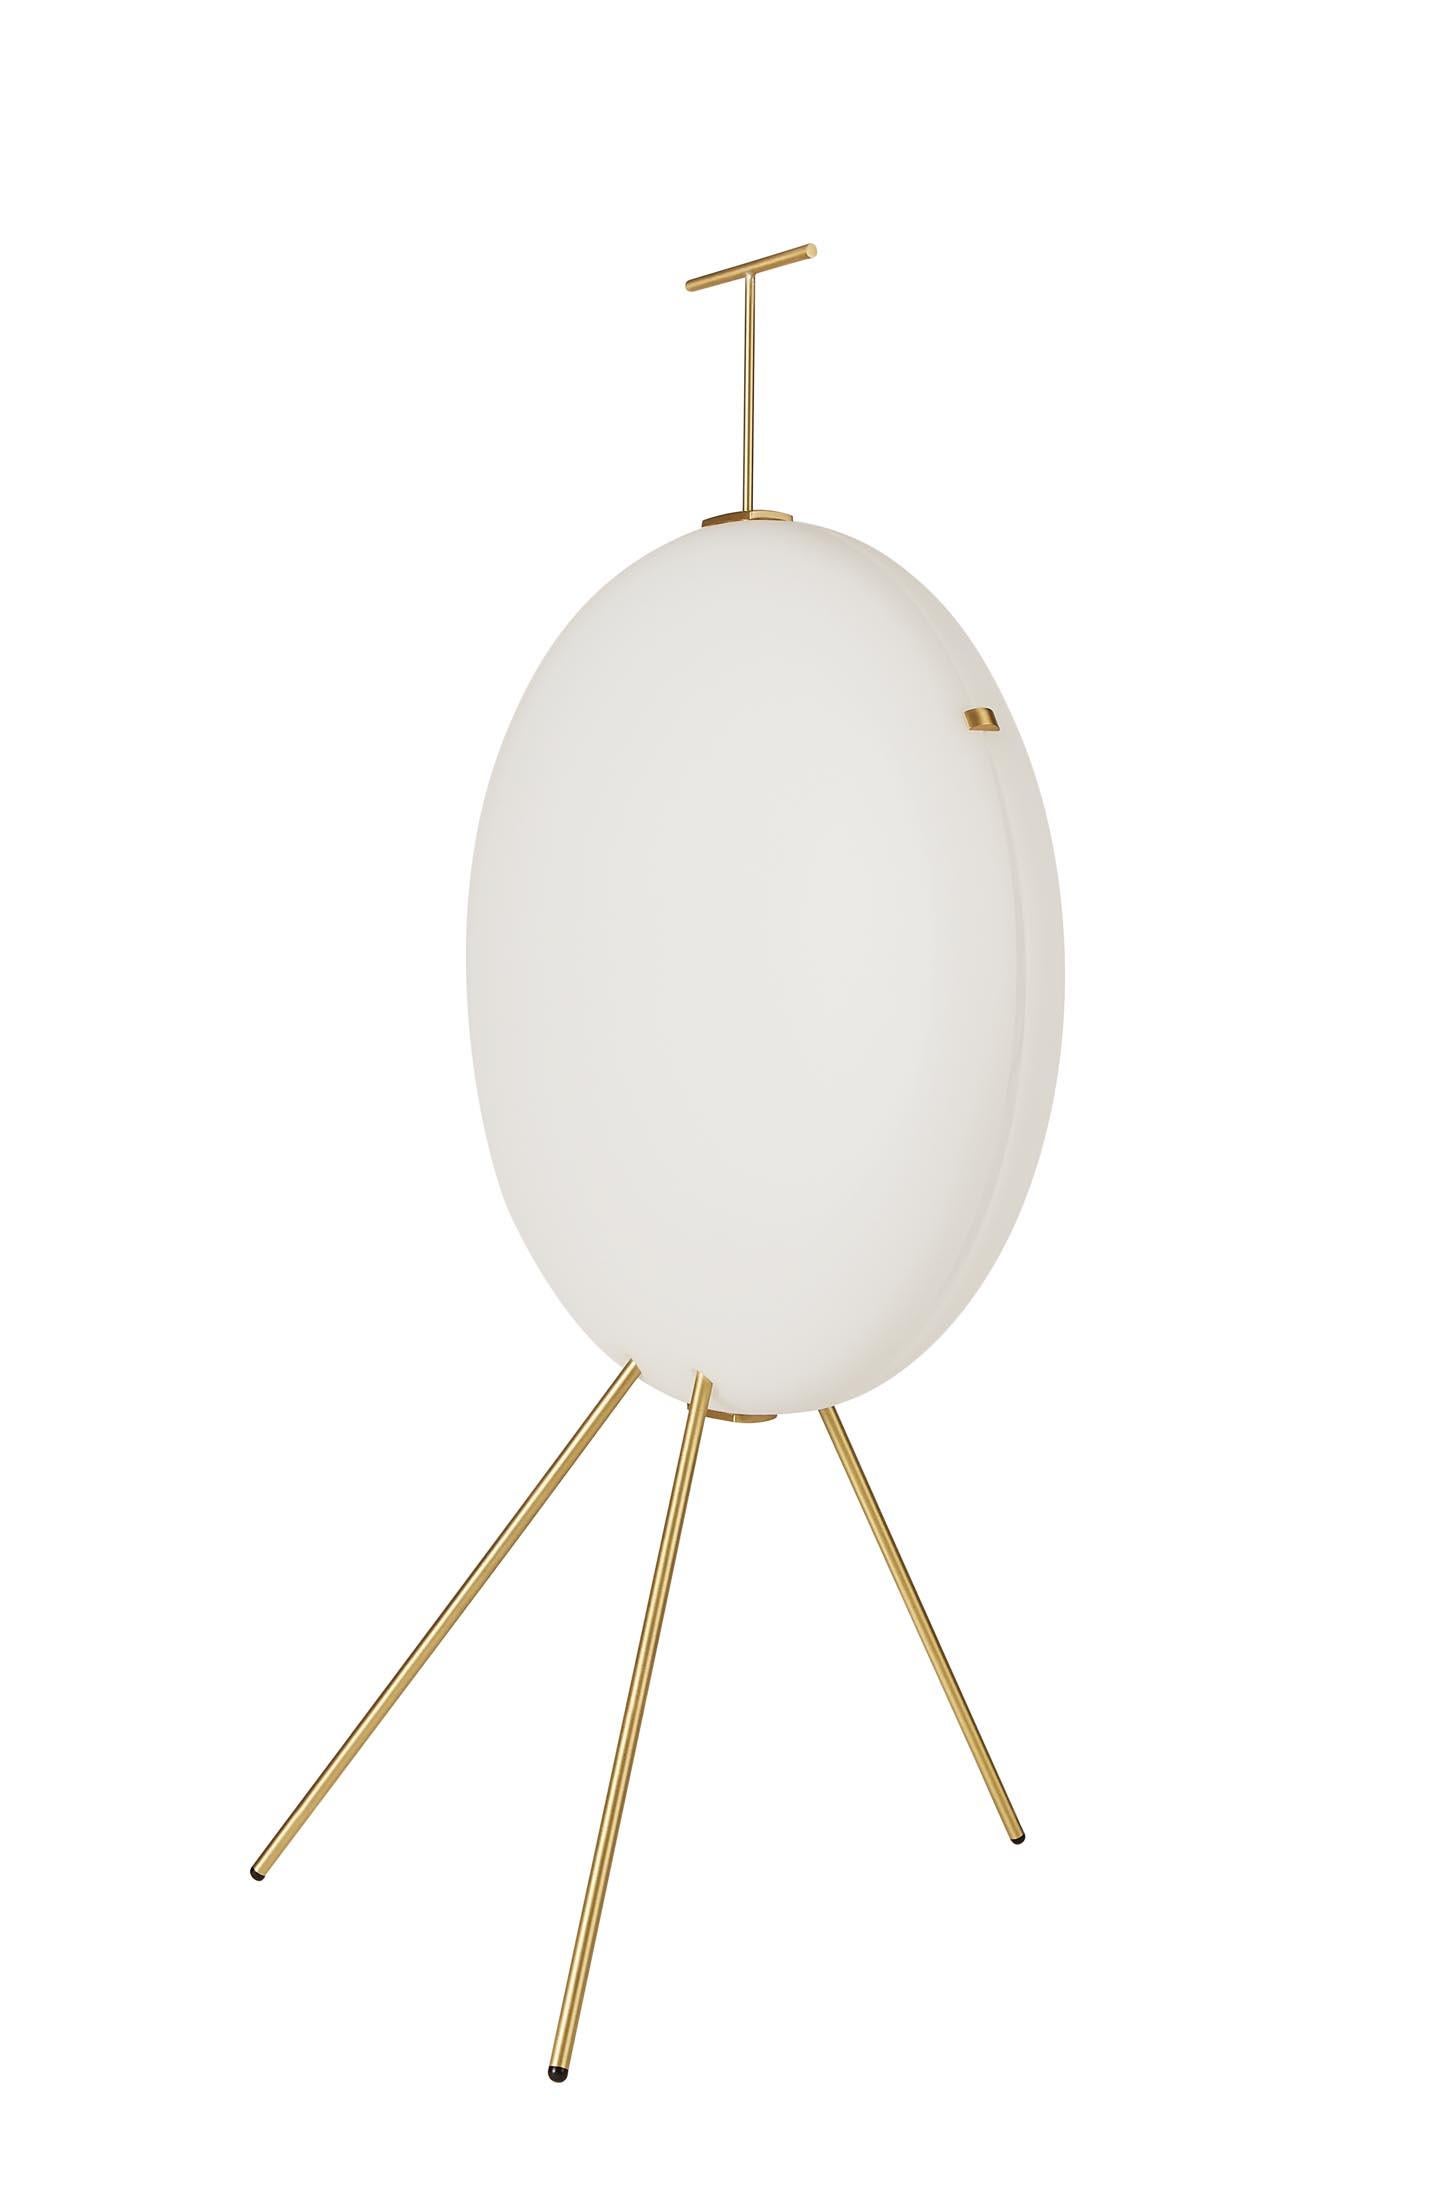 Gio Ponti Luna Verticale Floor Lamp in Brass for Tato Italia.

Originally designed by Italian icon Gio Ponti in 1957, this authorized re-edition by Tato Italia is executed in brushed brass hardware with acrylic diffuser and a step switch cord using